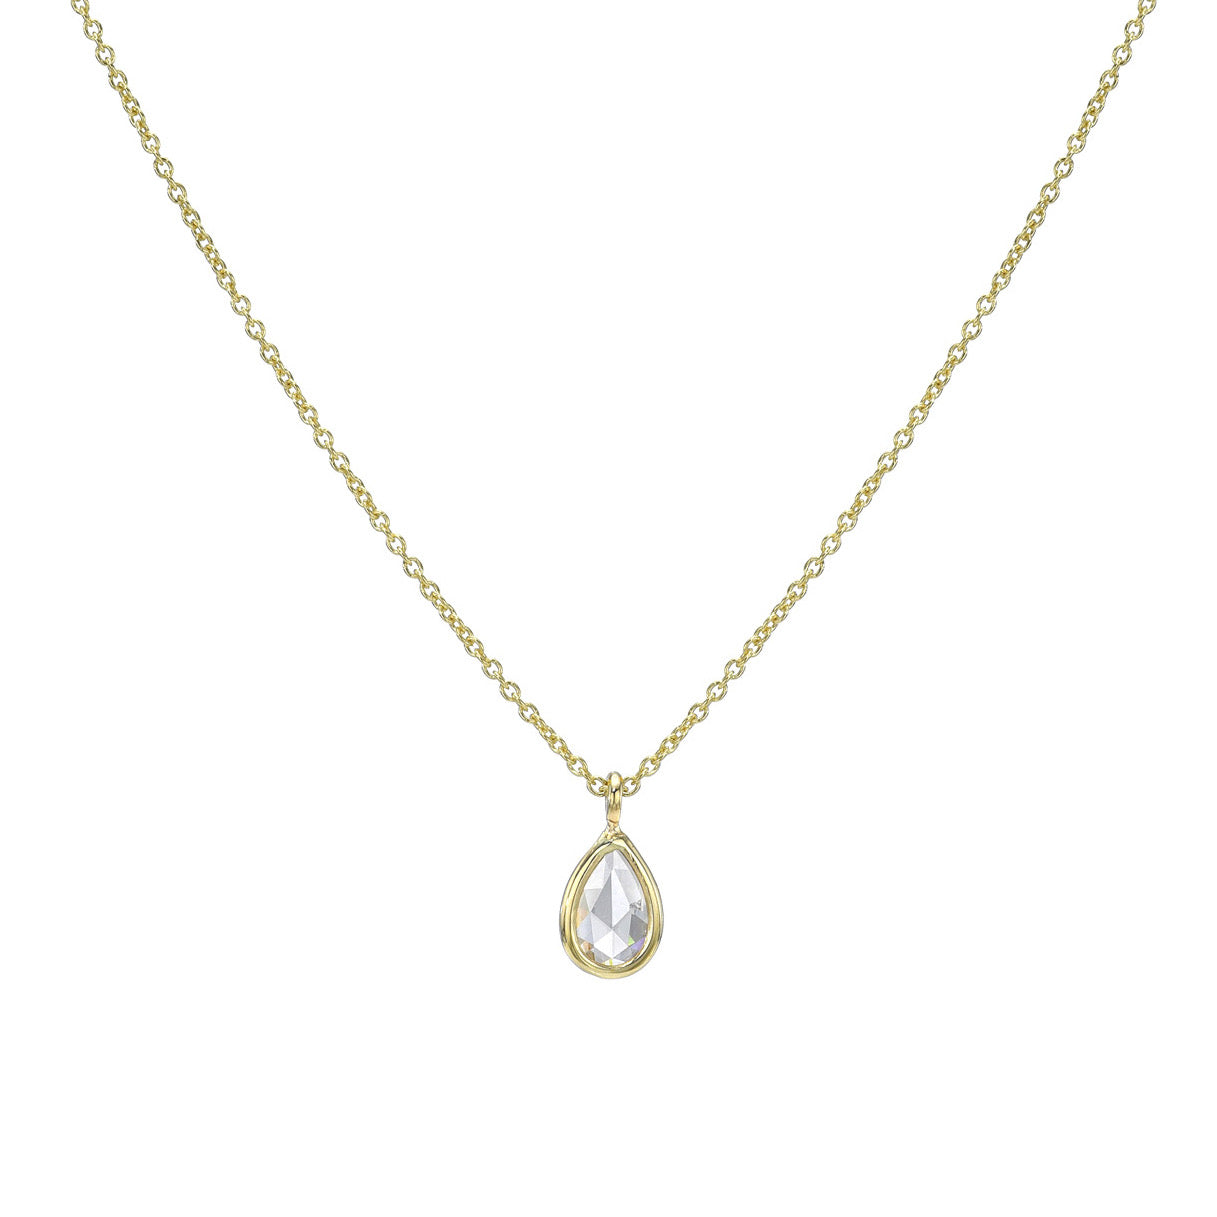 A Dainty Diamond Necklace by NIXIN Jewelry with a rose cut diamond in 14k gold.